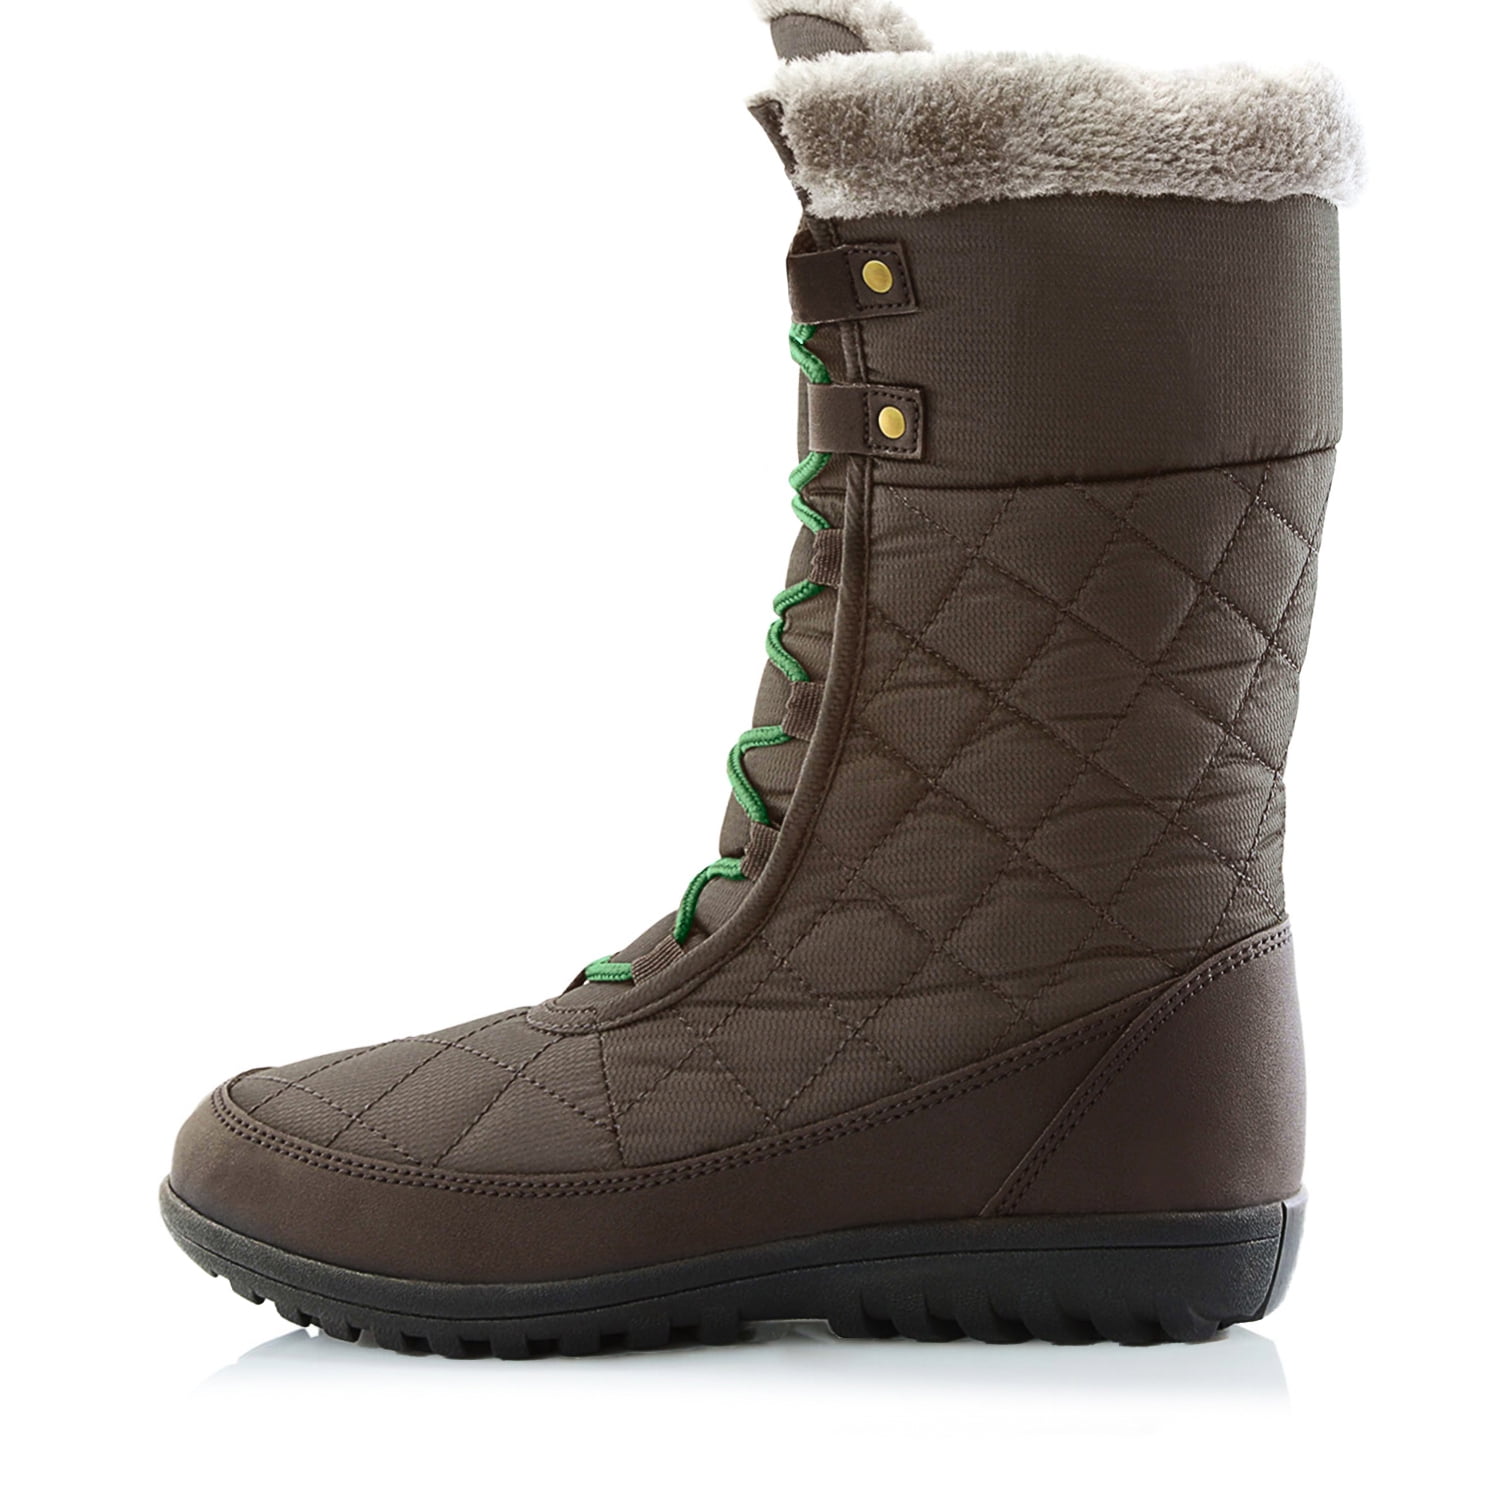 DailyShoes Womens Winter Boots Sale 